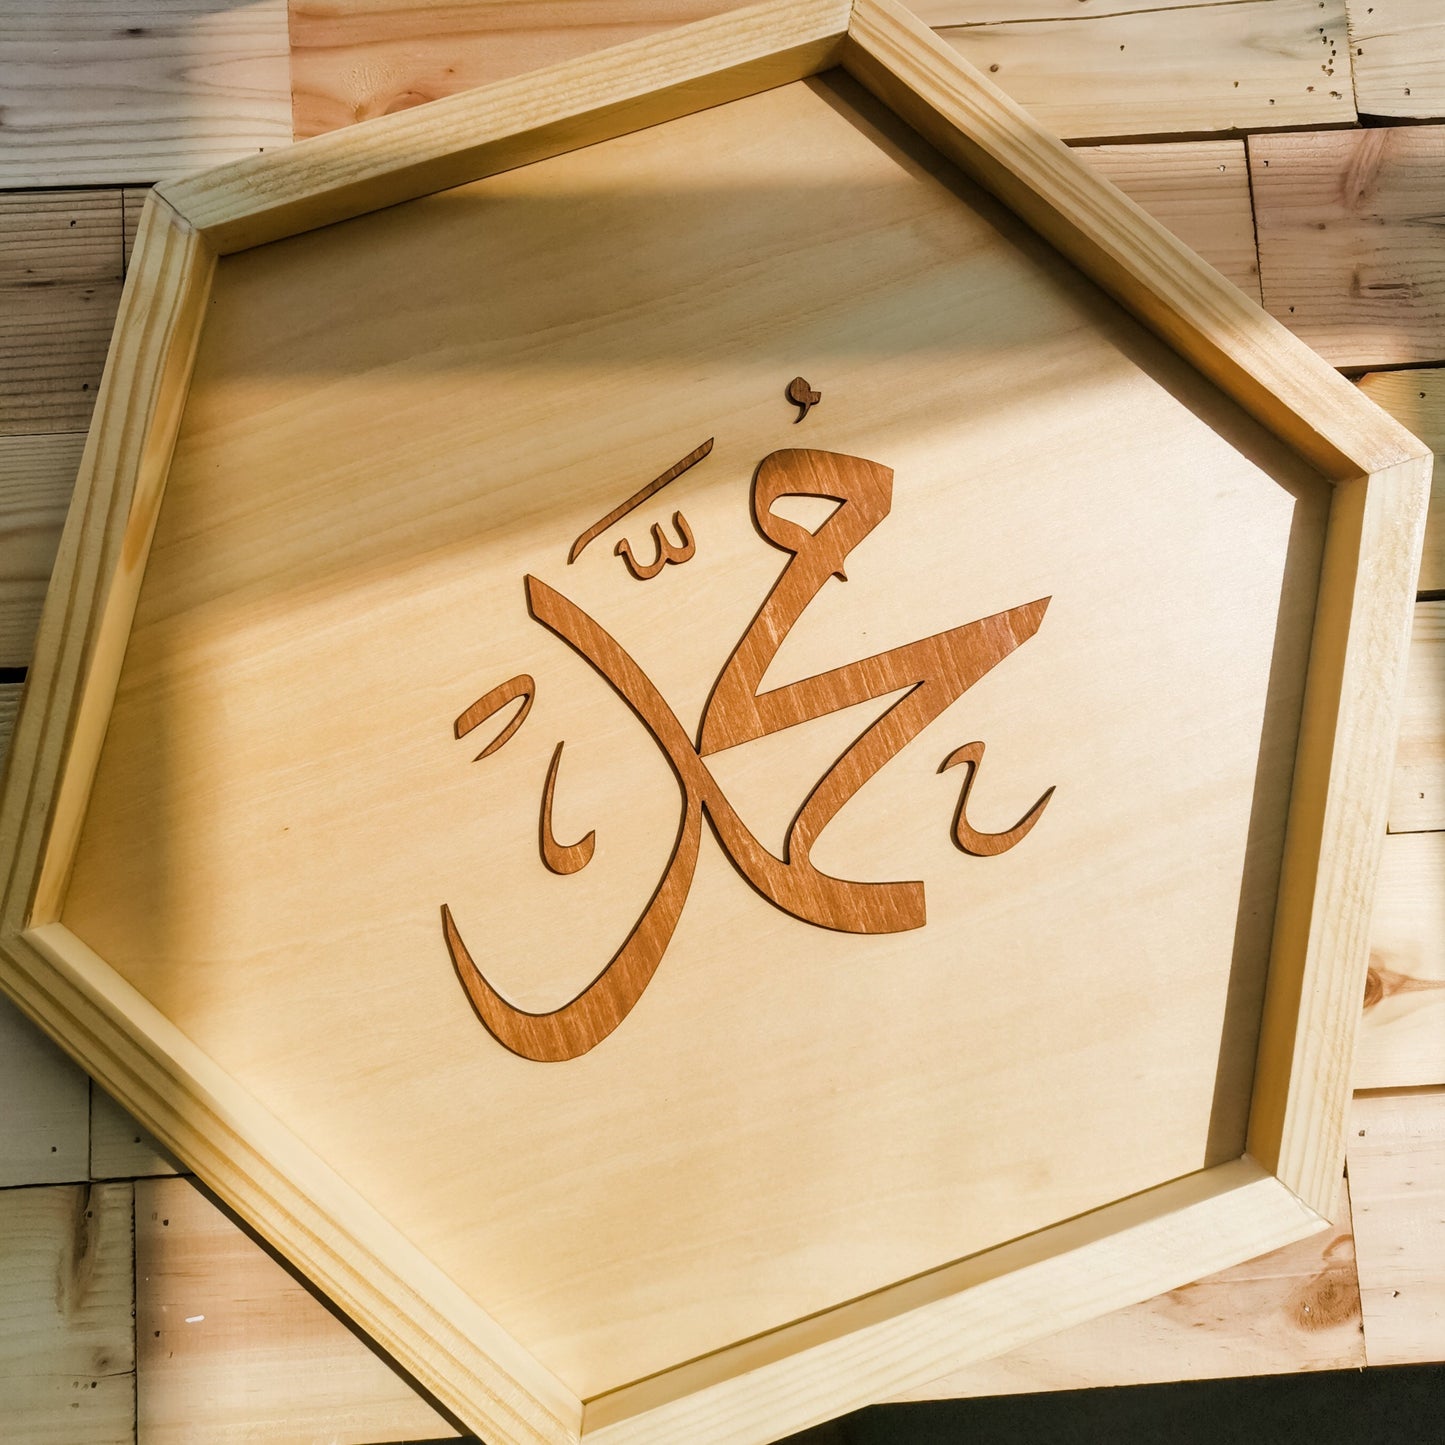 [SPECIAL OFFER] Allah & Muhammad Hexagon Frame - Large